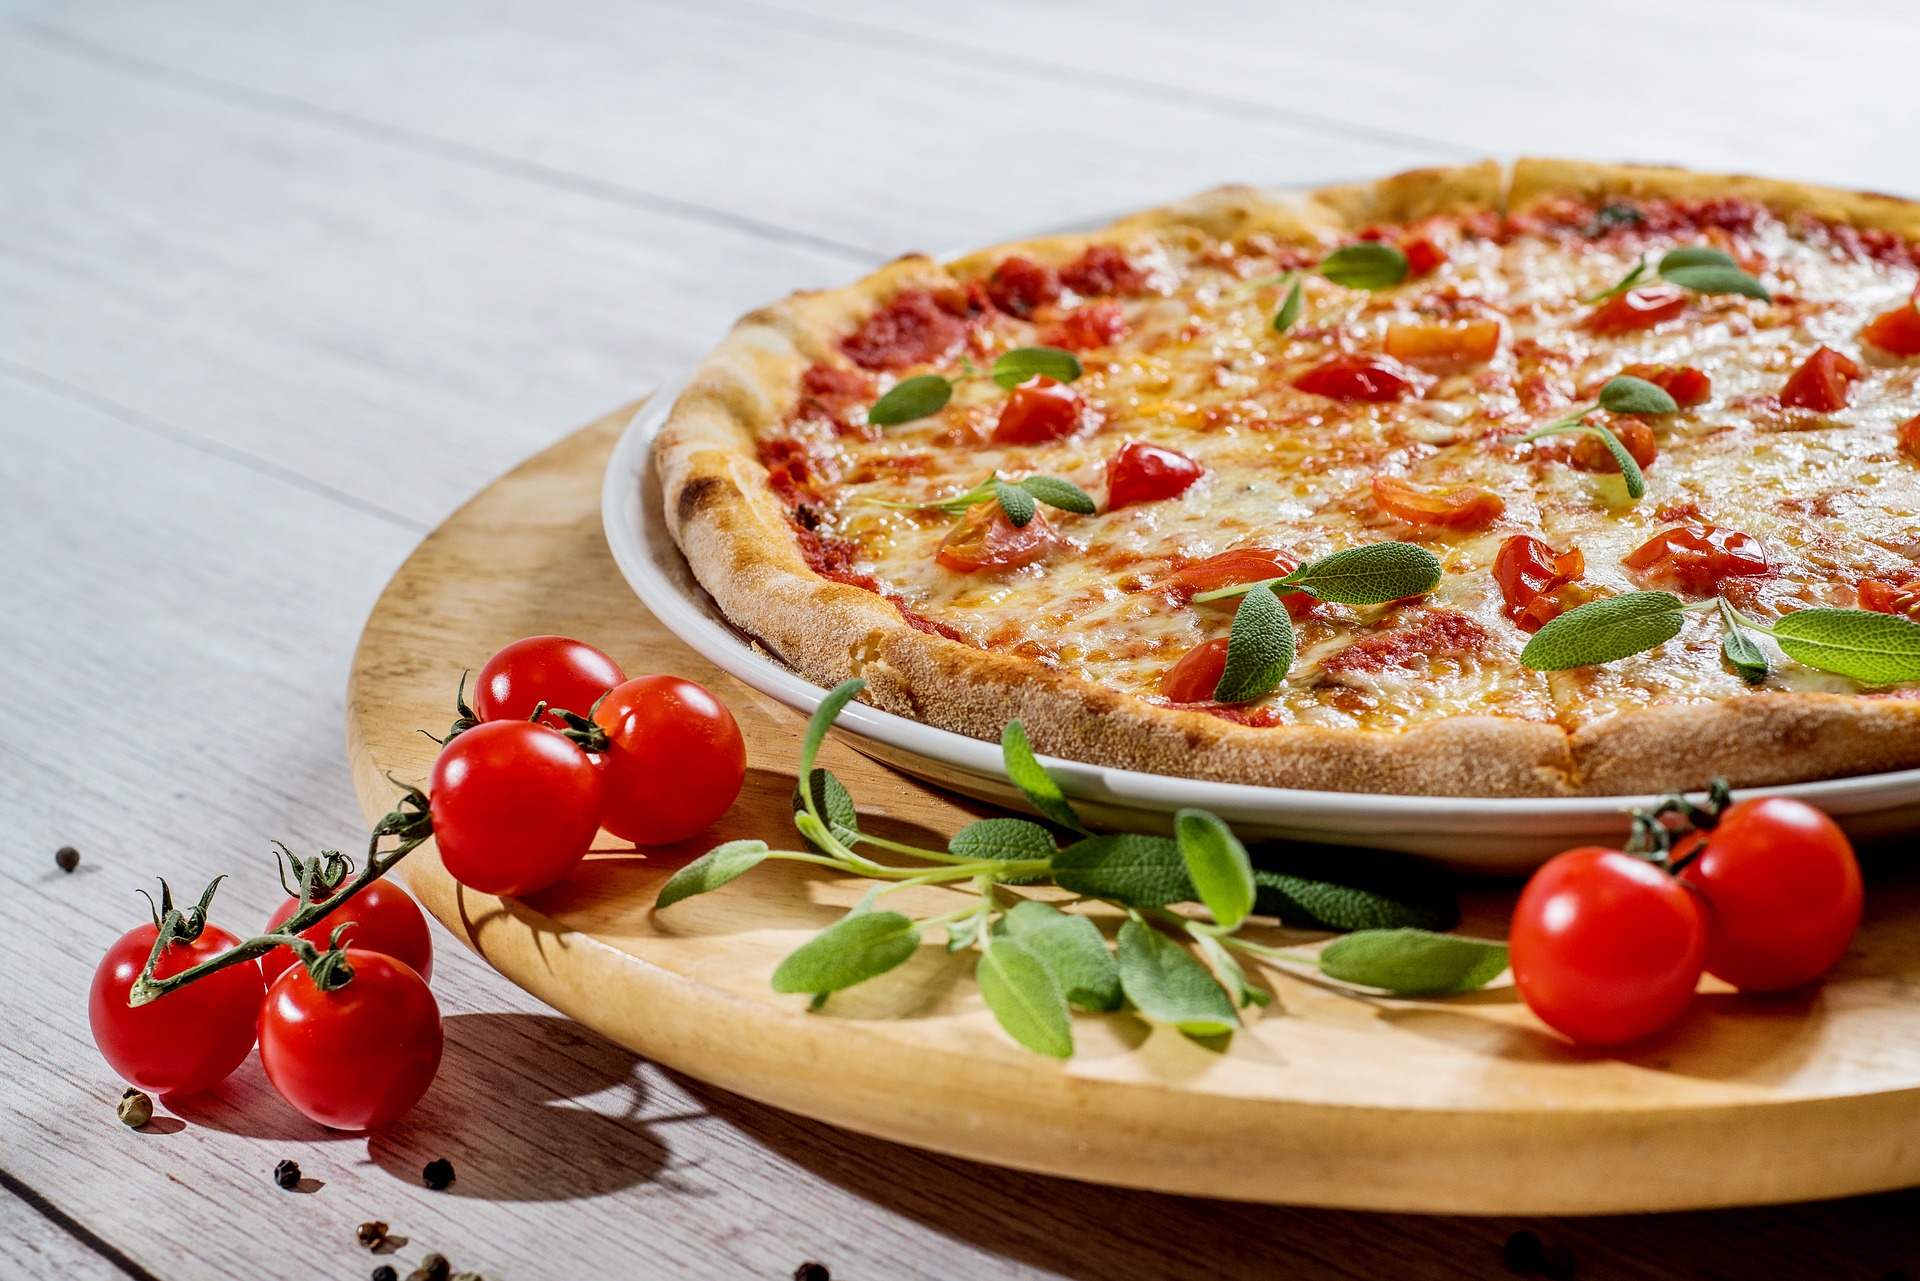 Search new recipe database...oooh wait, a delicious pizza!